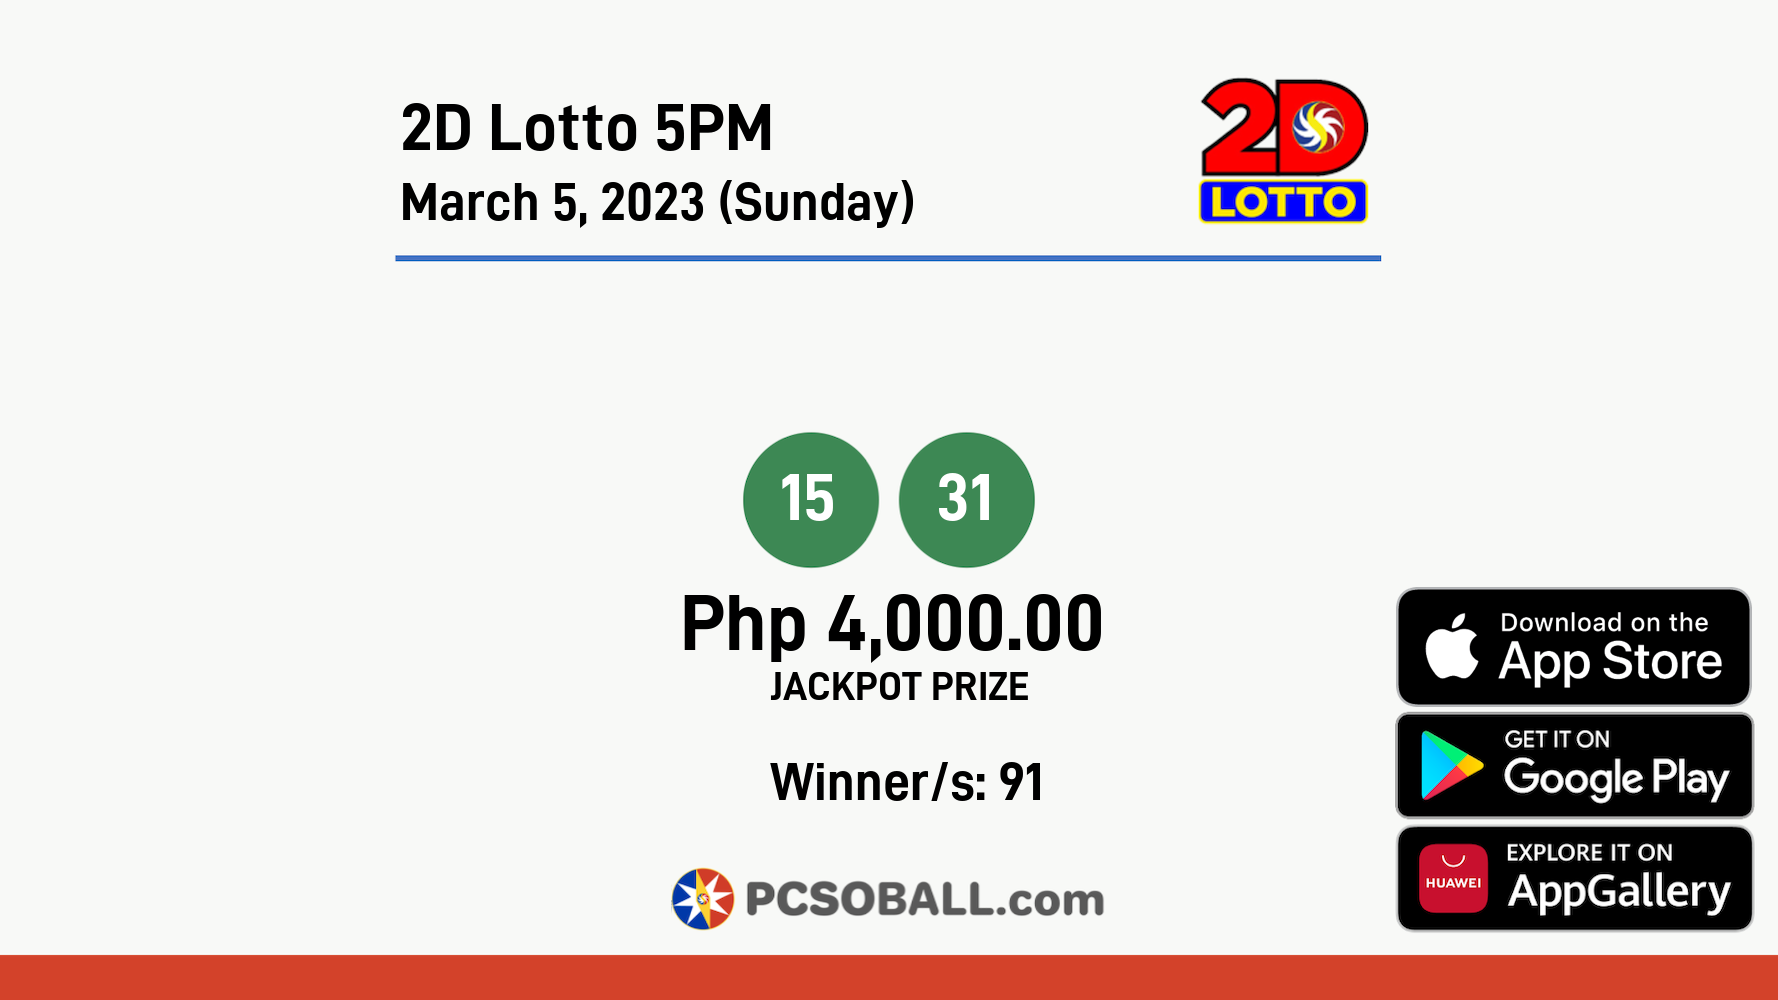 2D Lotto 5PM March 5, 2023 (Sunday) Result